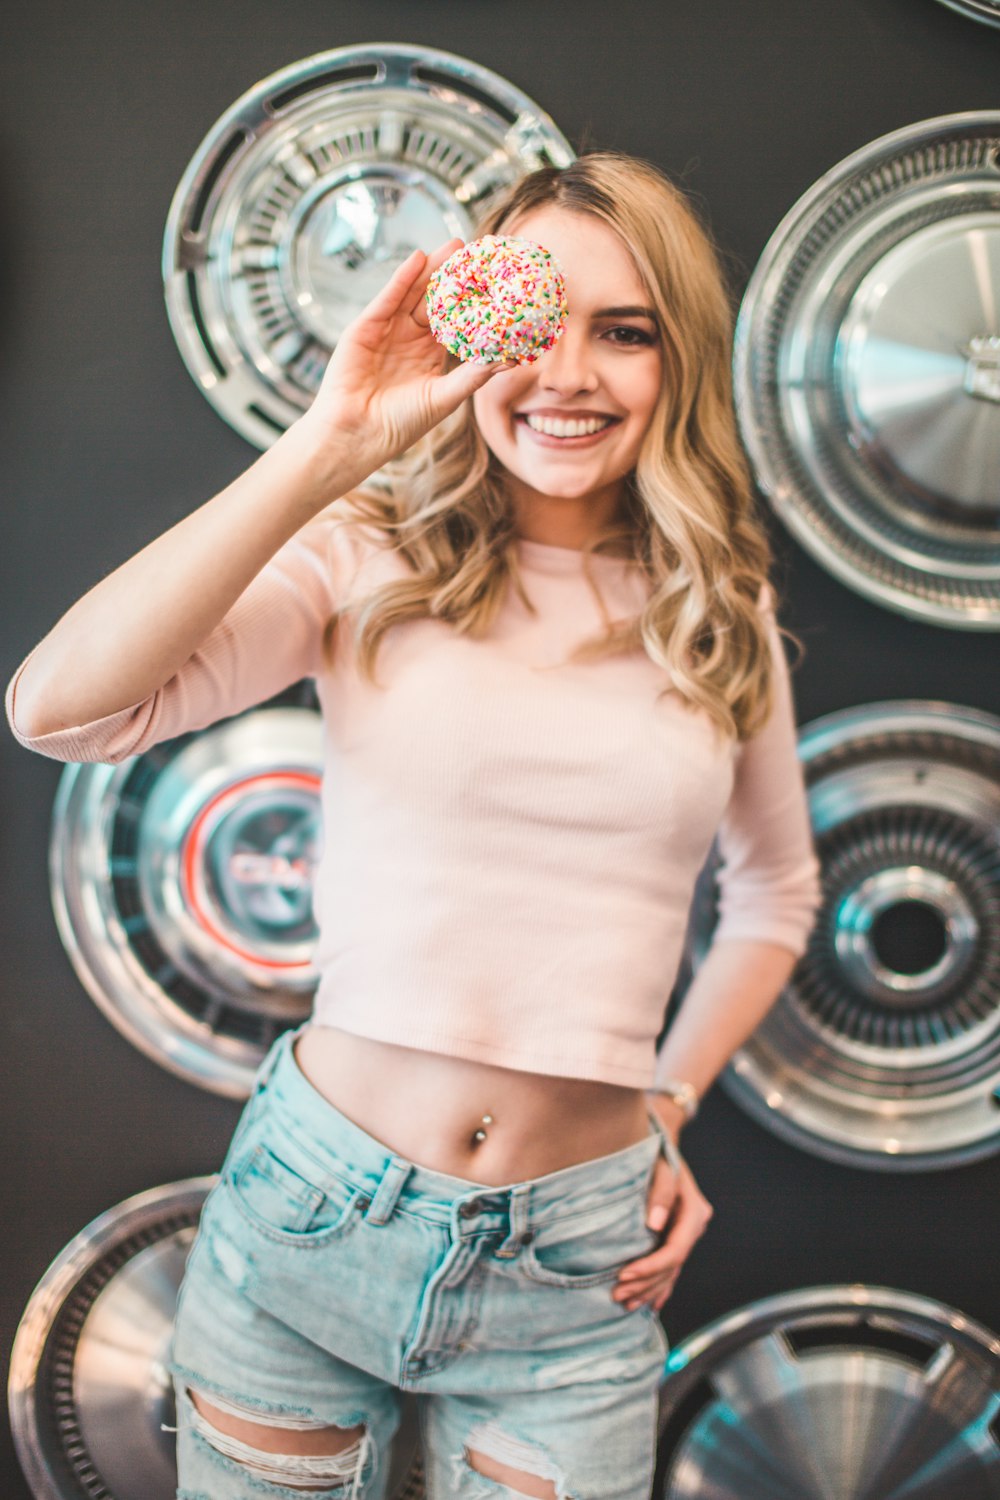 woman holding donut